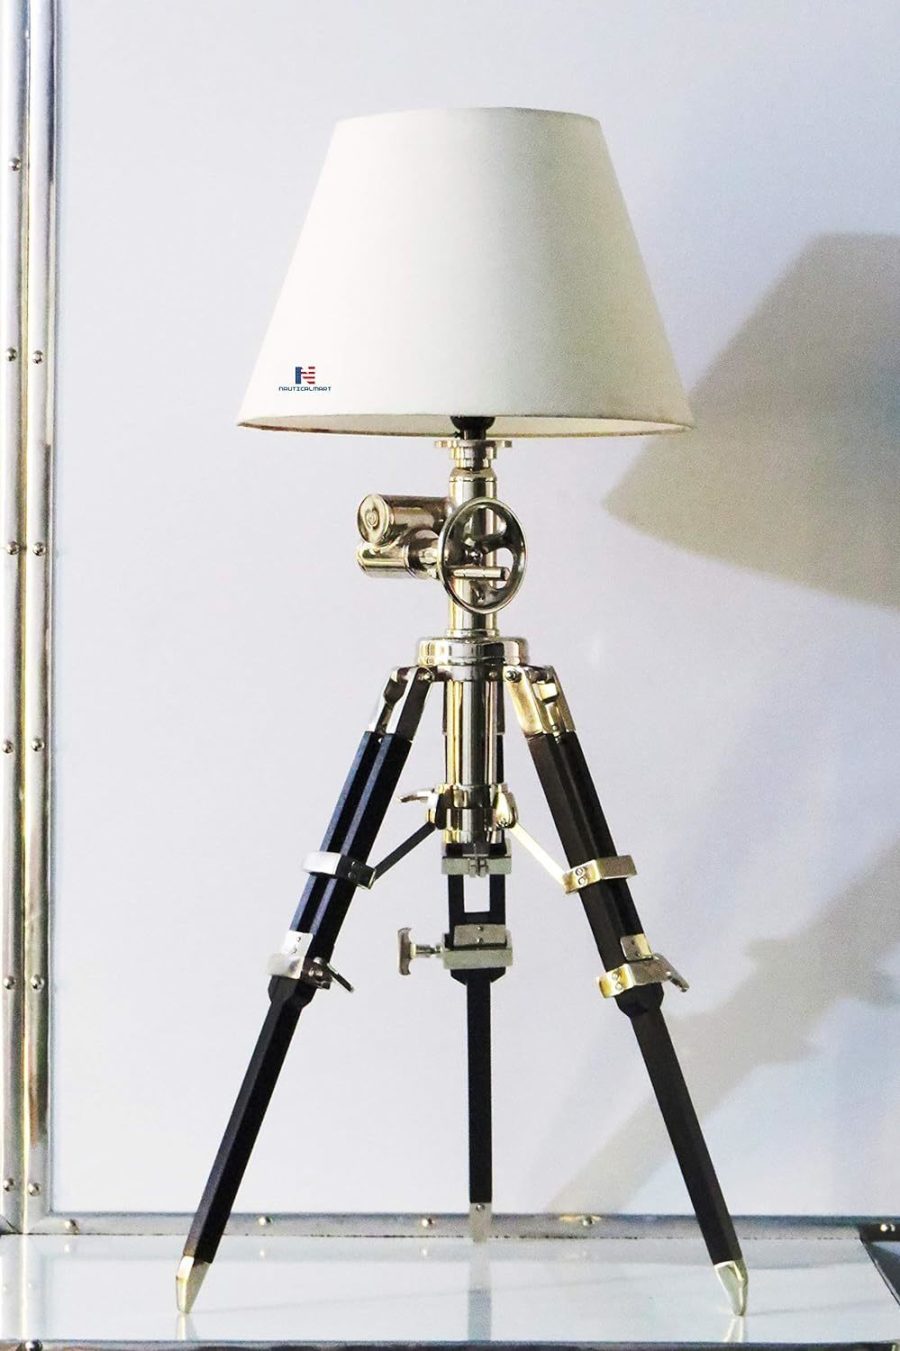 Nautical Royal Marine Tripod Table LAMP for Living Room (Shade Not Included)